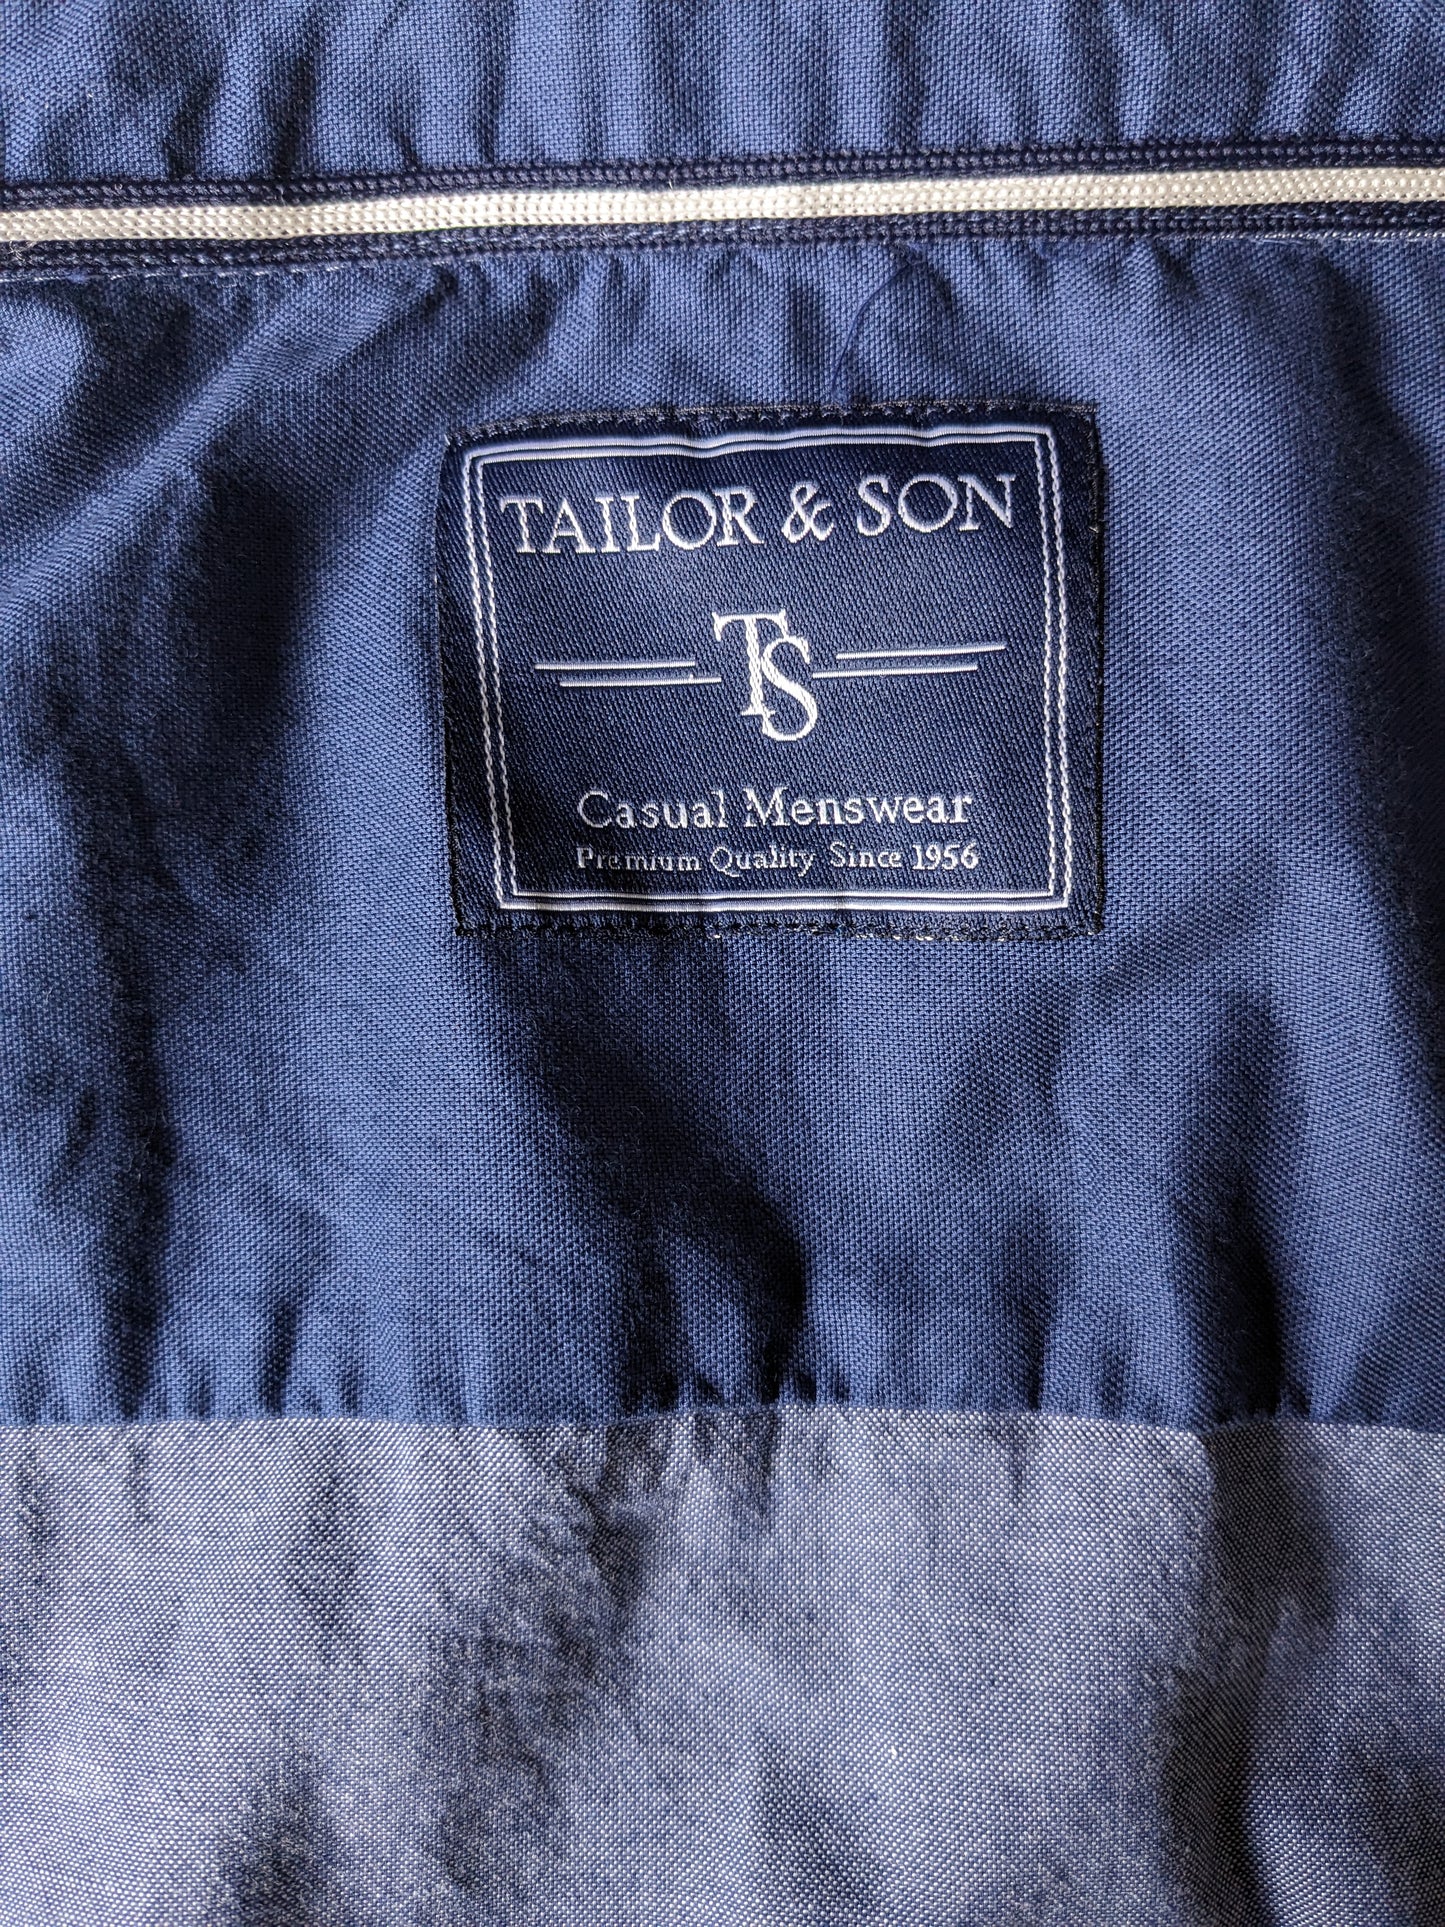 Tailor & Son shirt. Blue mixed with applications. Size 2XL / XXL.